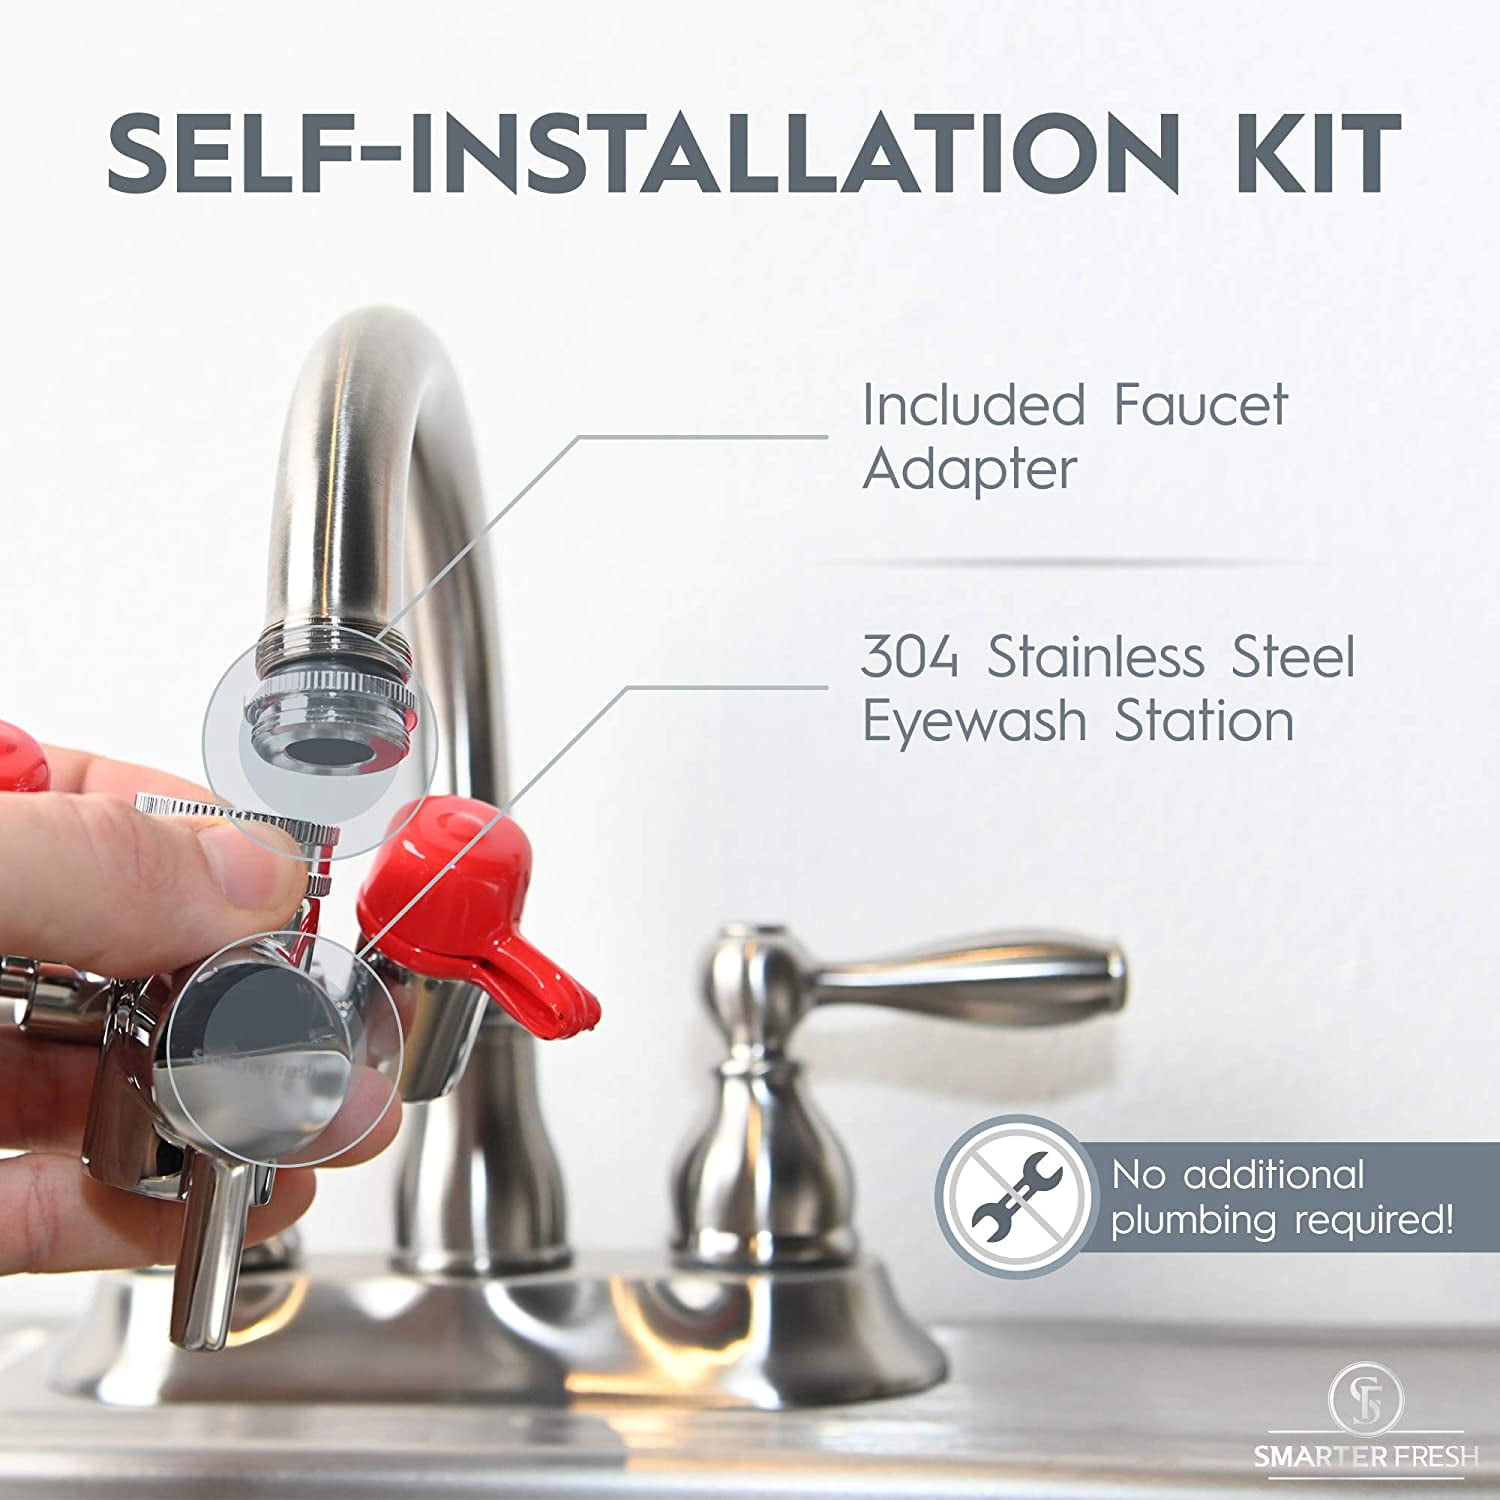 ETE ETMATE Faucet Mounted Eye Wash Station First AID Emergency Eye Wash Unit for Sink Attachment Sink Mount for Eyes and Skin